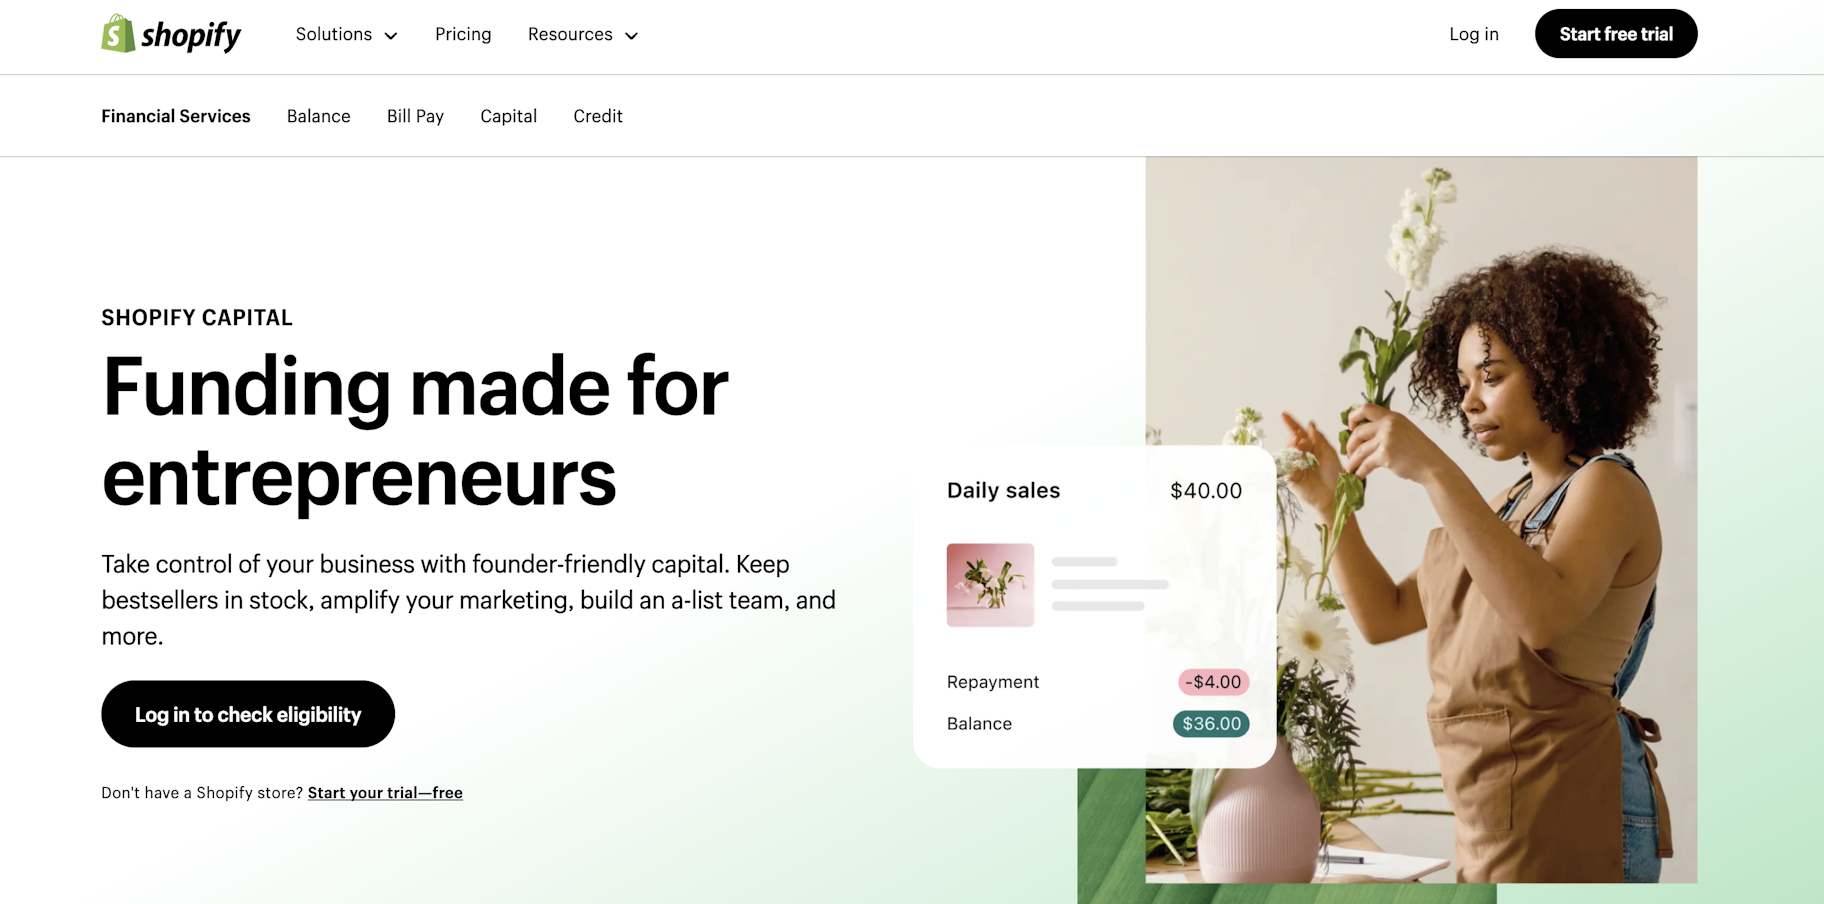 startup business loans: Shopify Capital